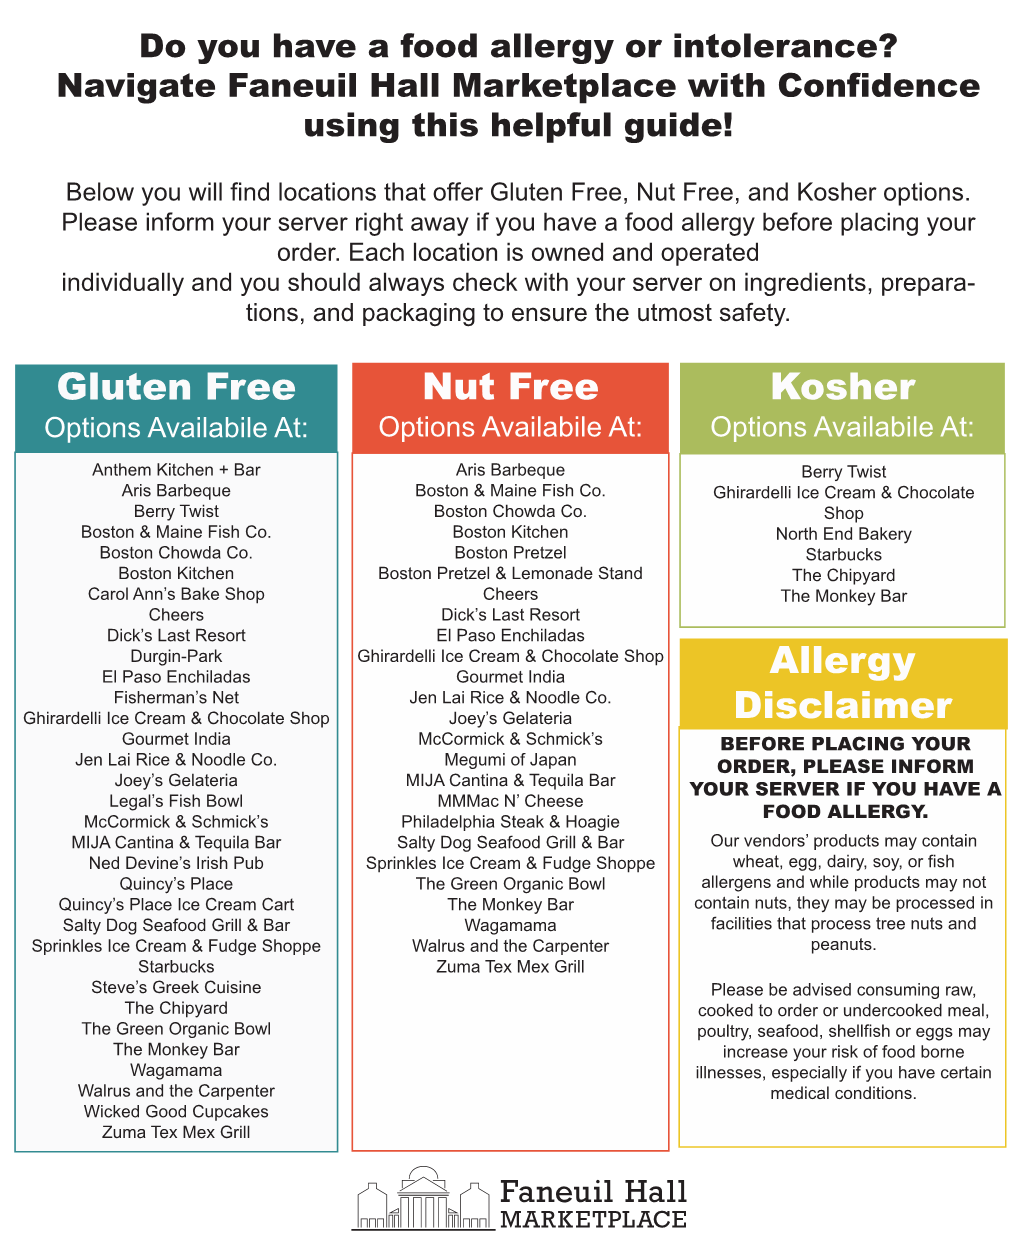 Food Allergy Or Intolerance? Navigate Faneuil Hall Marketplace with Confidence Using This Helpful Guide!